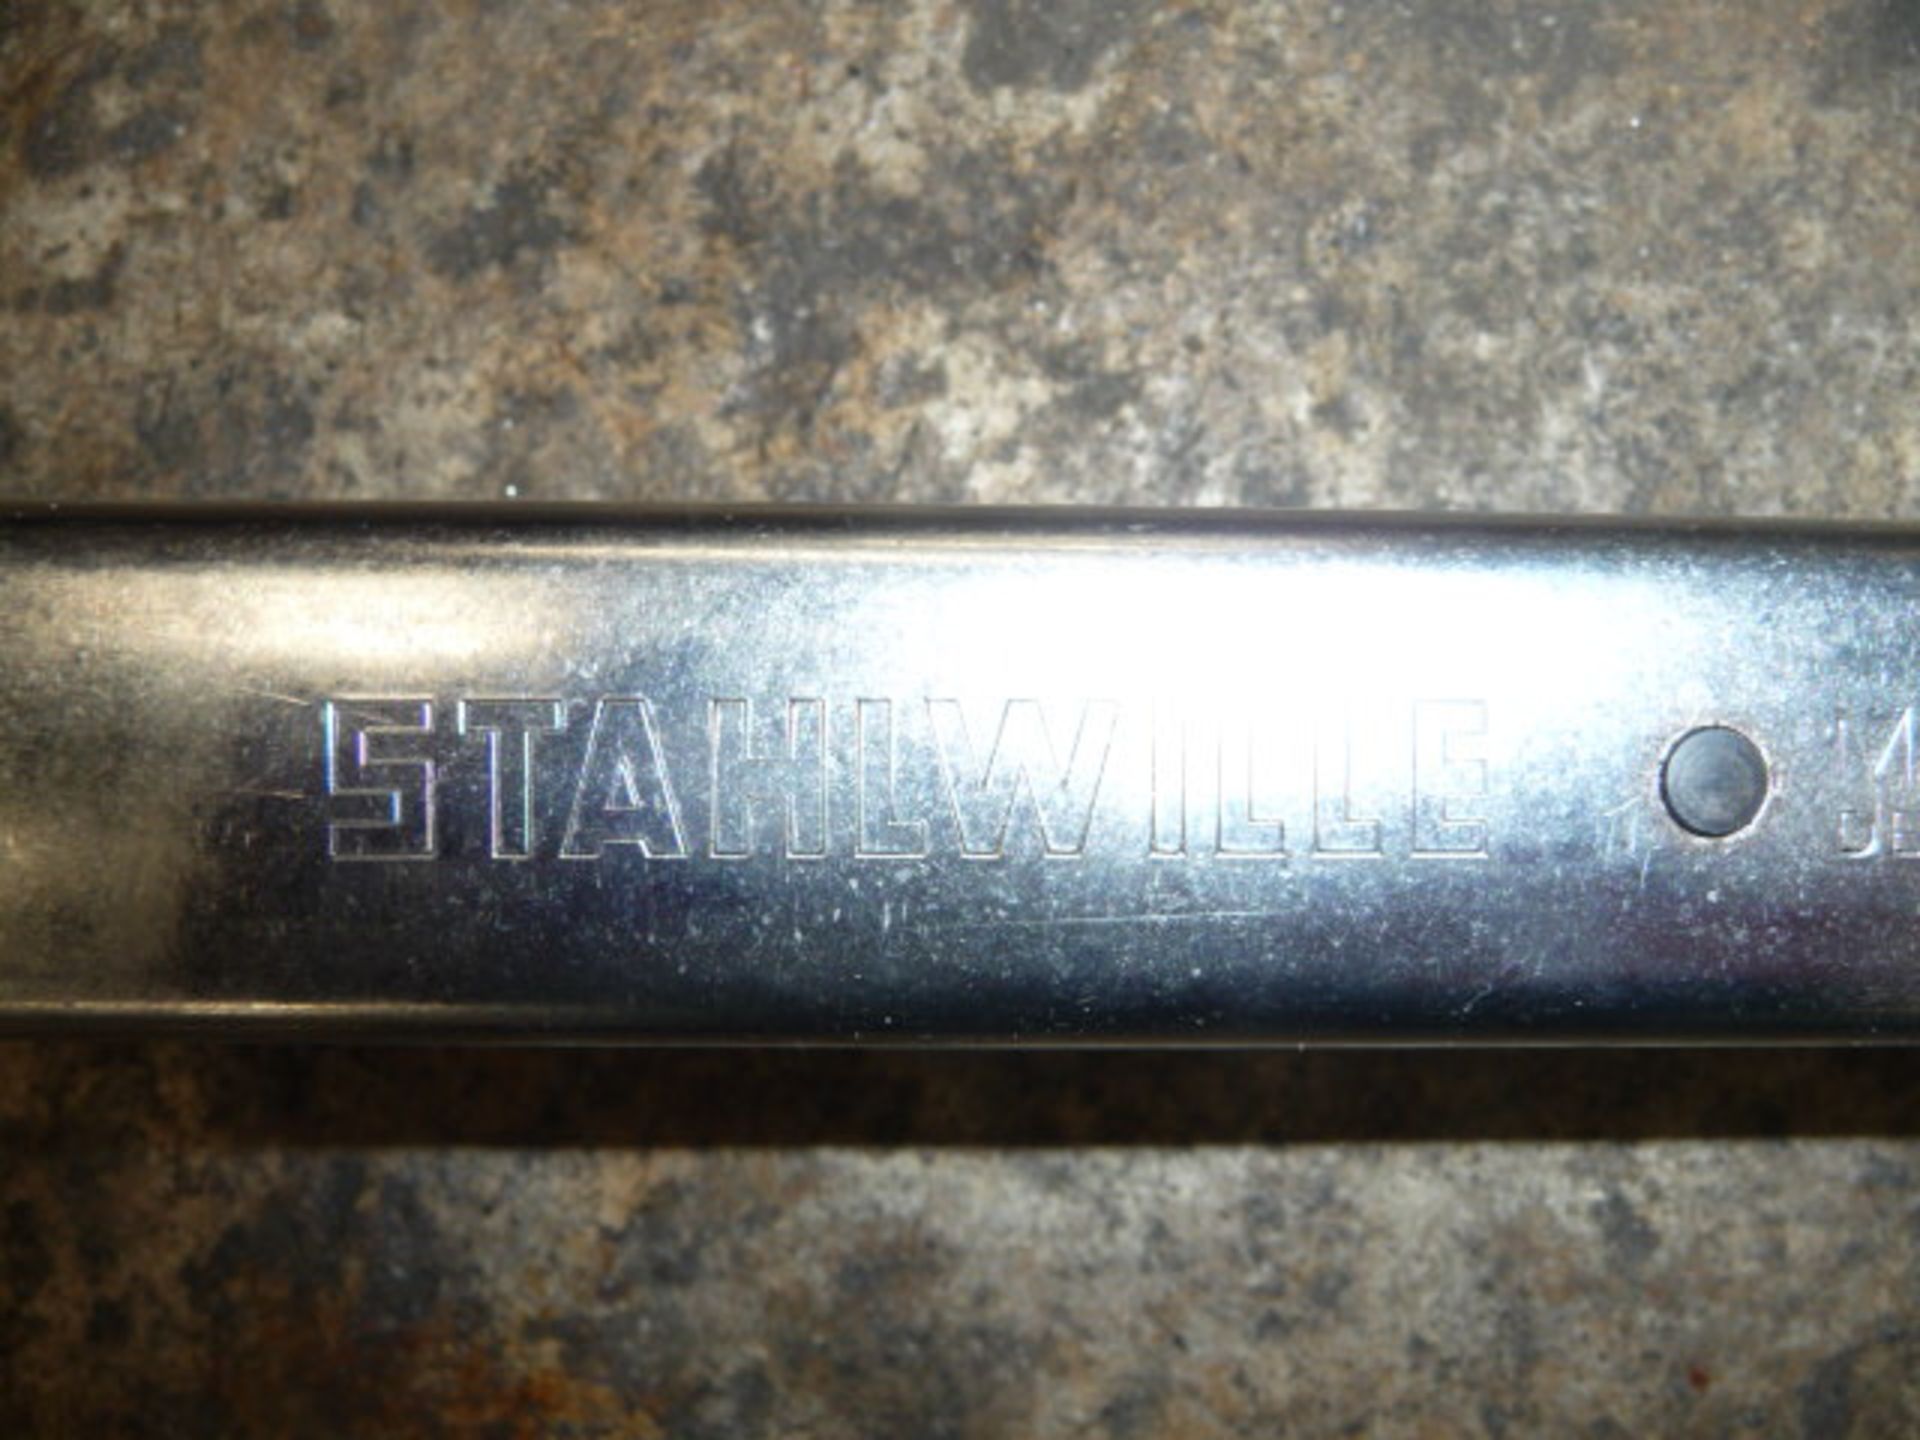 Mercedes-Benz Type Stahlwille Torque Wrench 730R/12 - Image 8 of 8